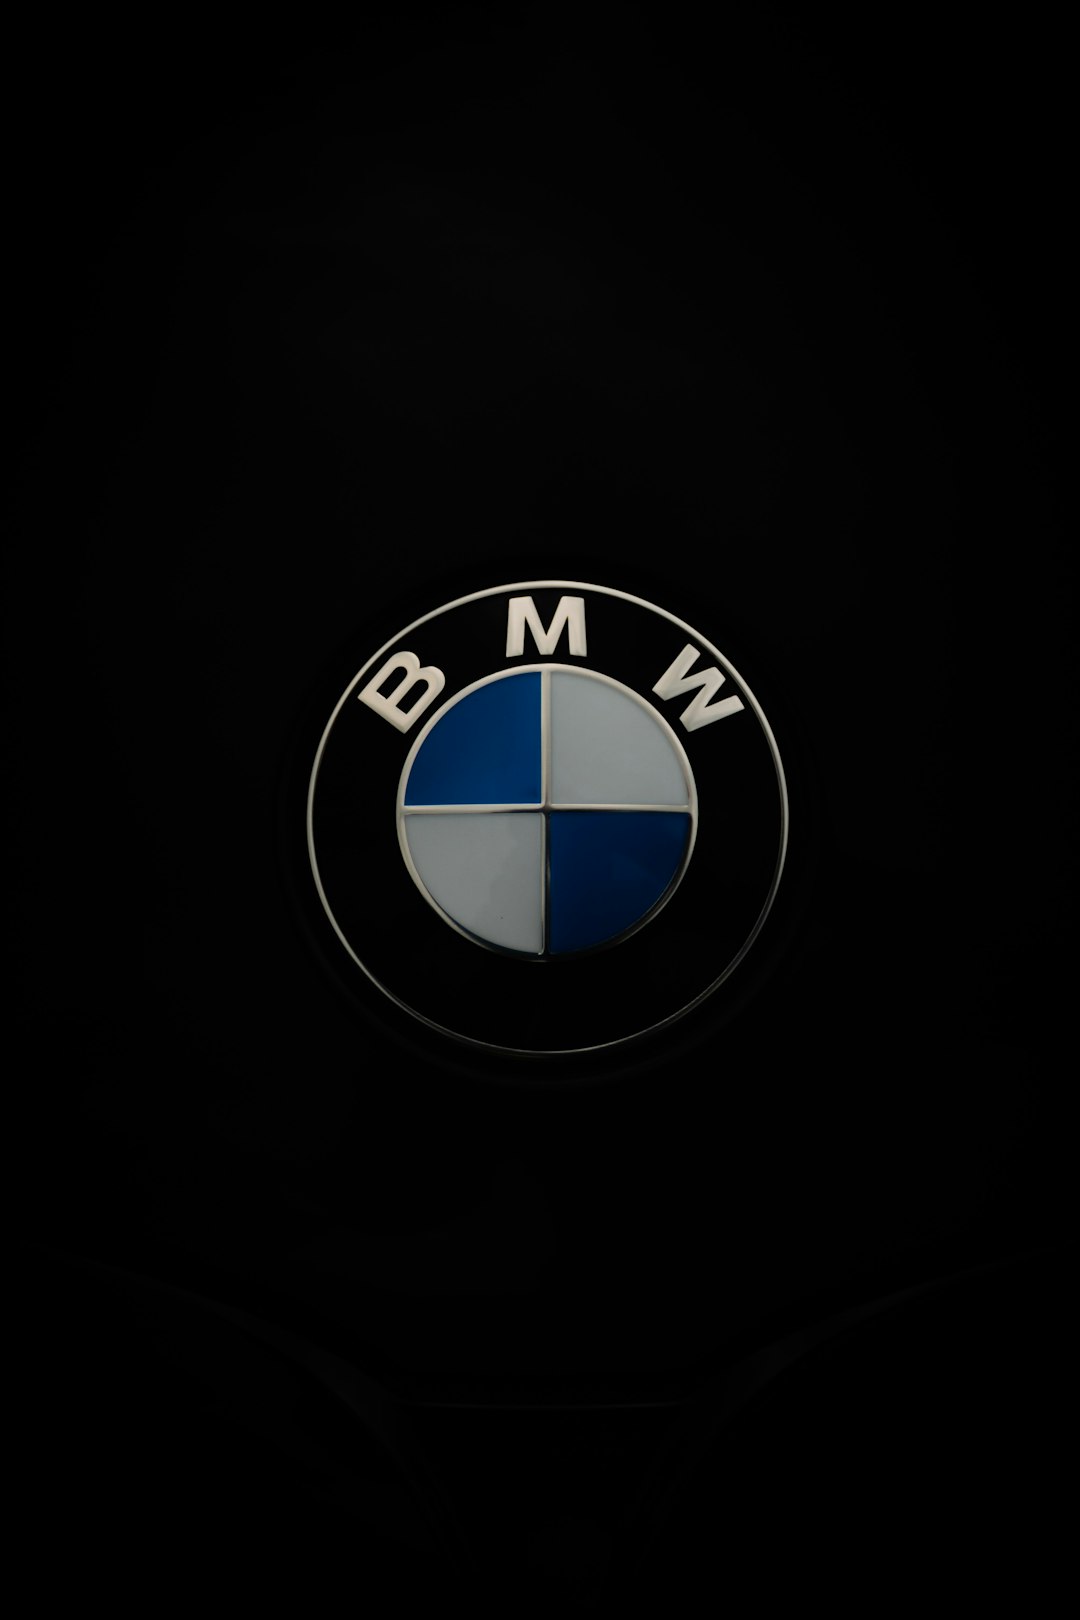 The BMW X5 M is a high-performance luxury SUV with a powerful engine and sporty design.